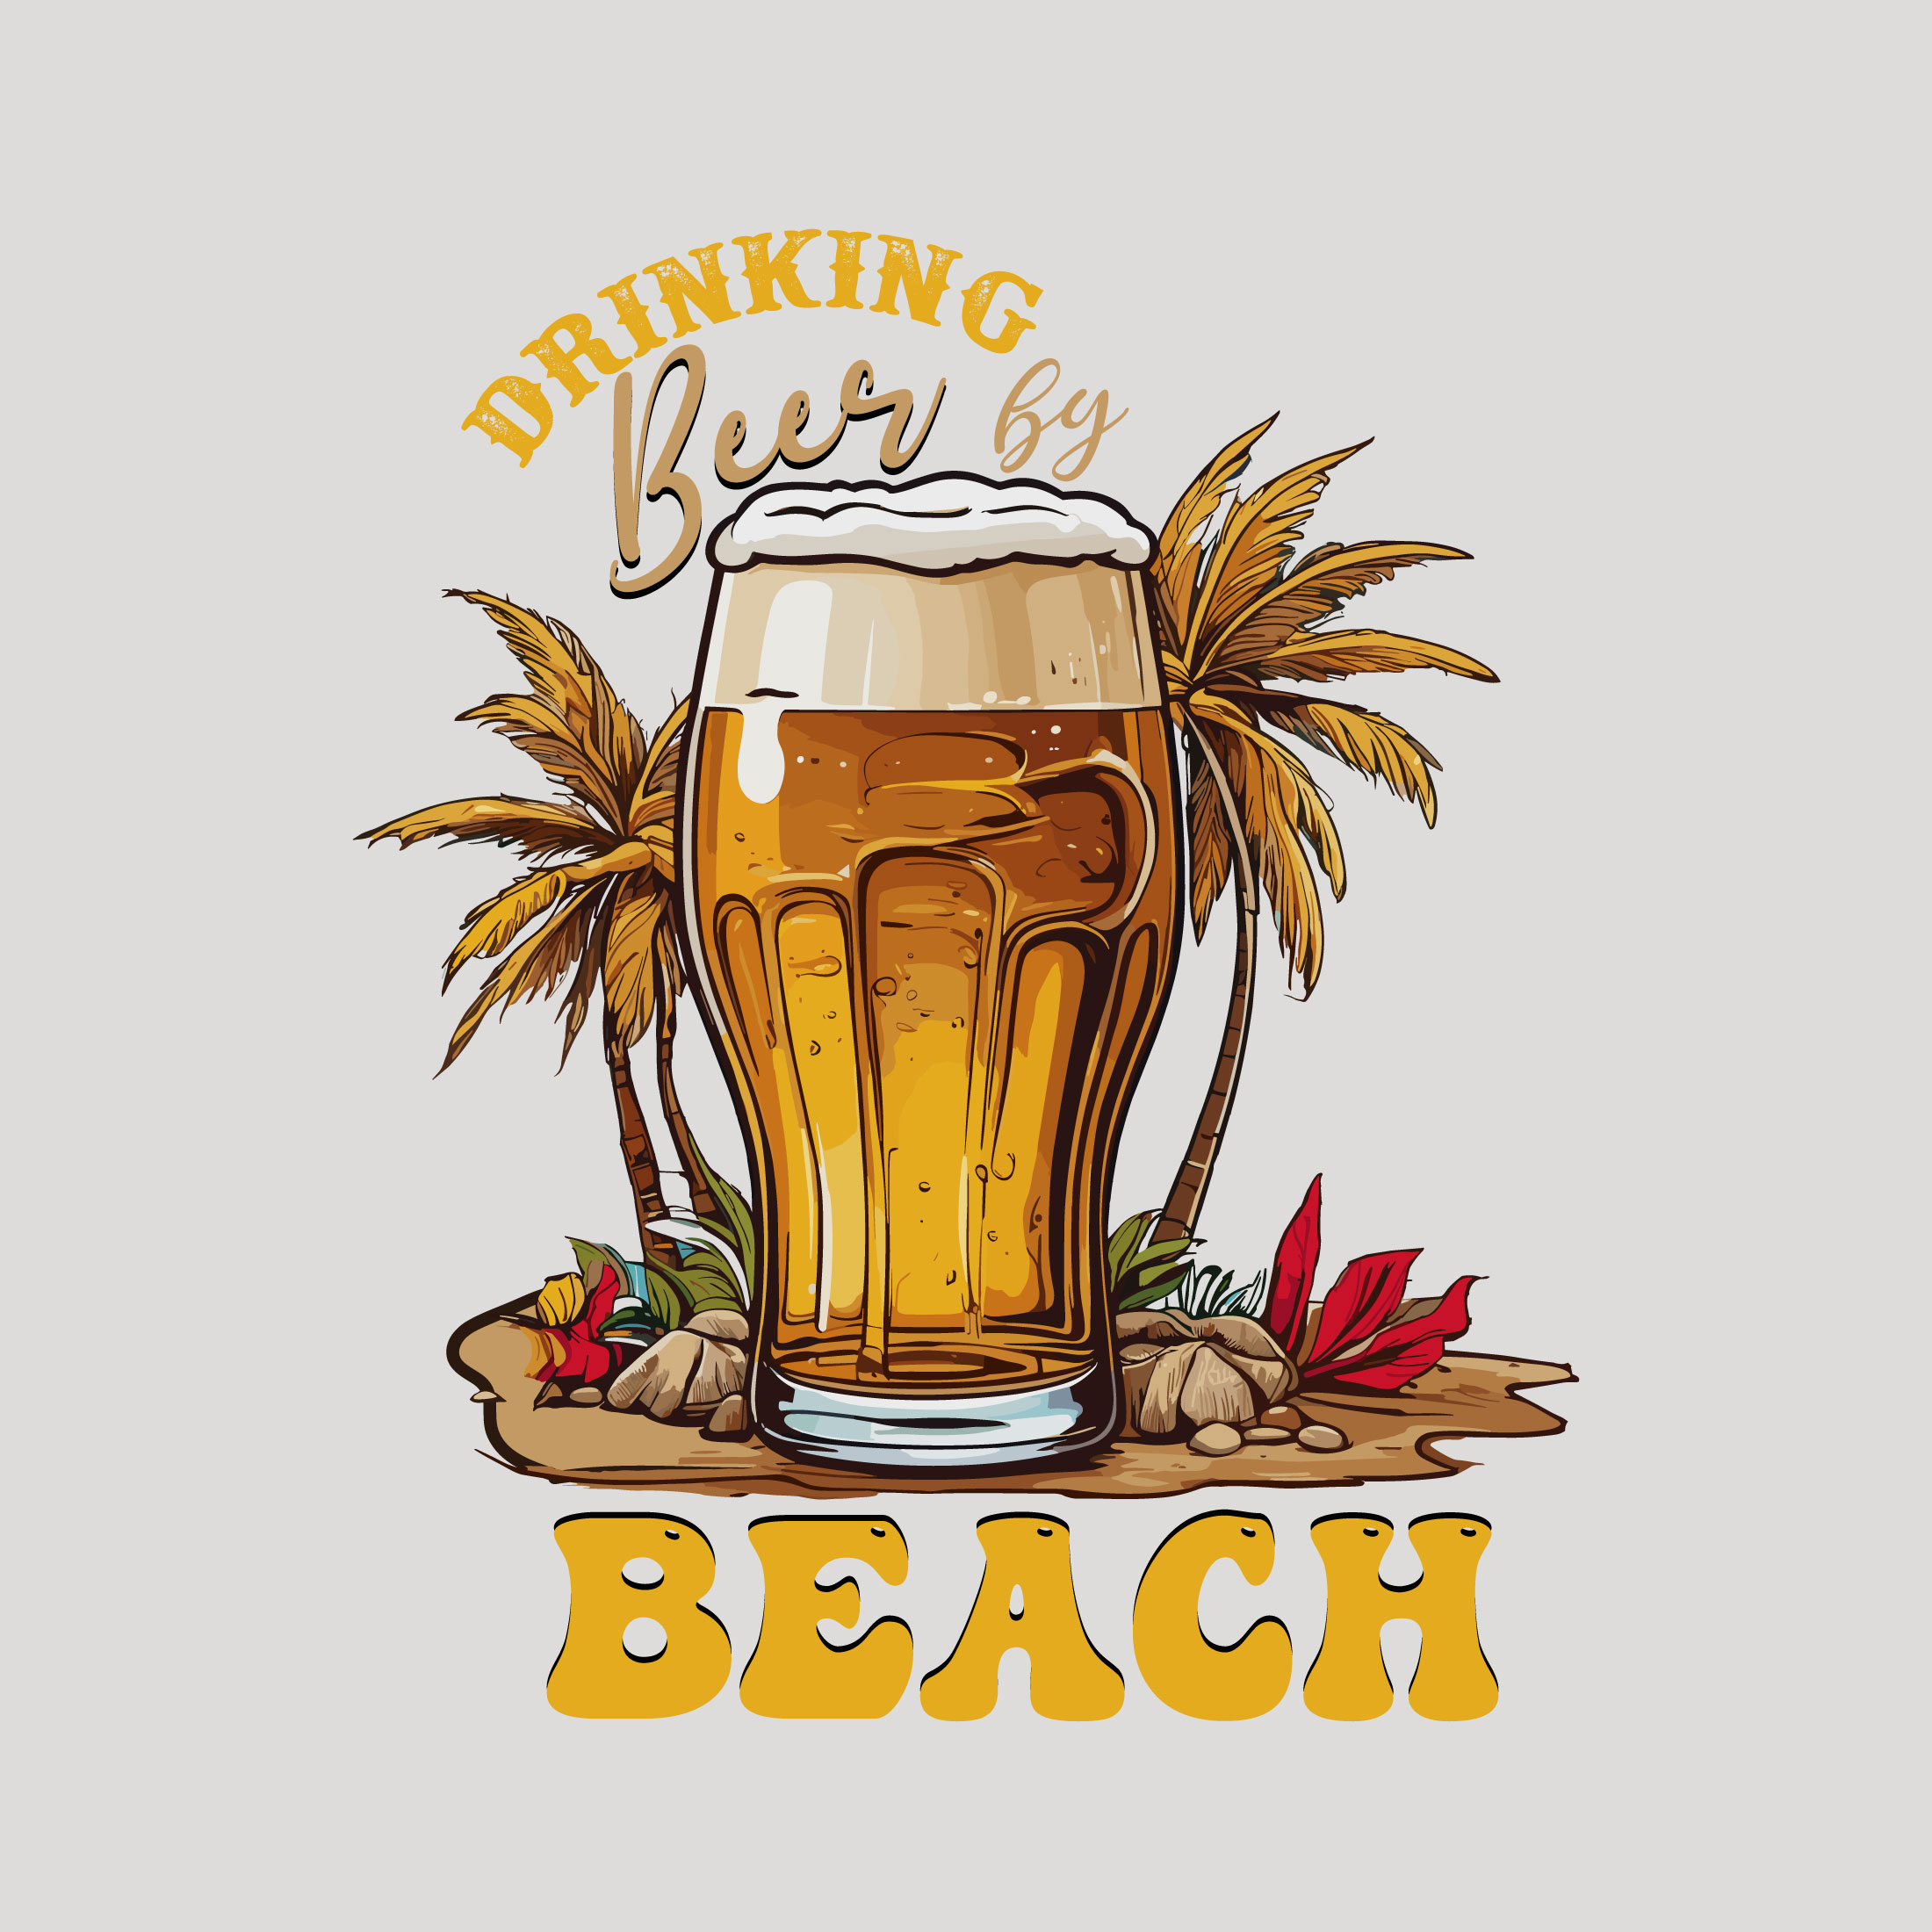 drinking beer by beach 443